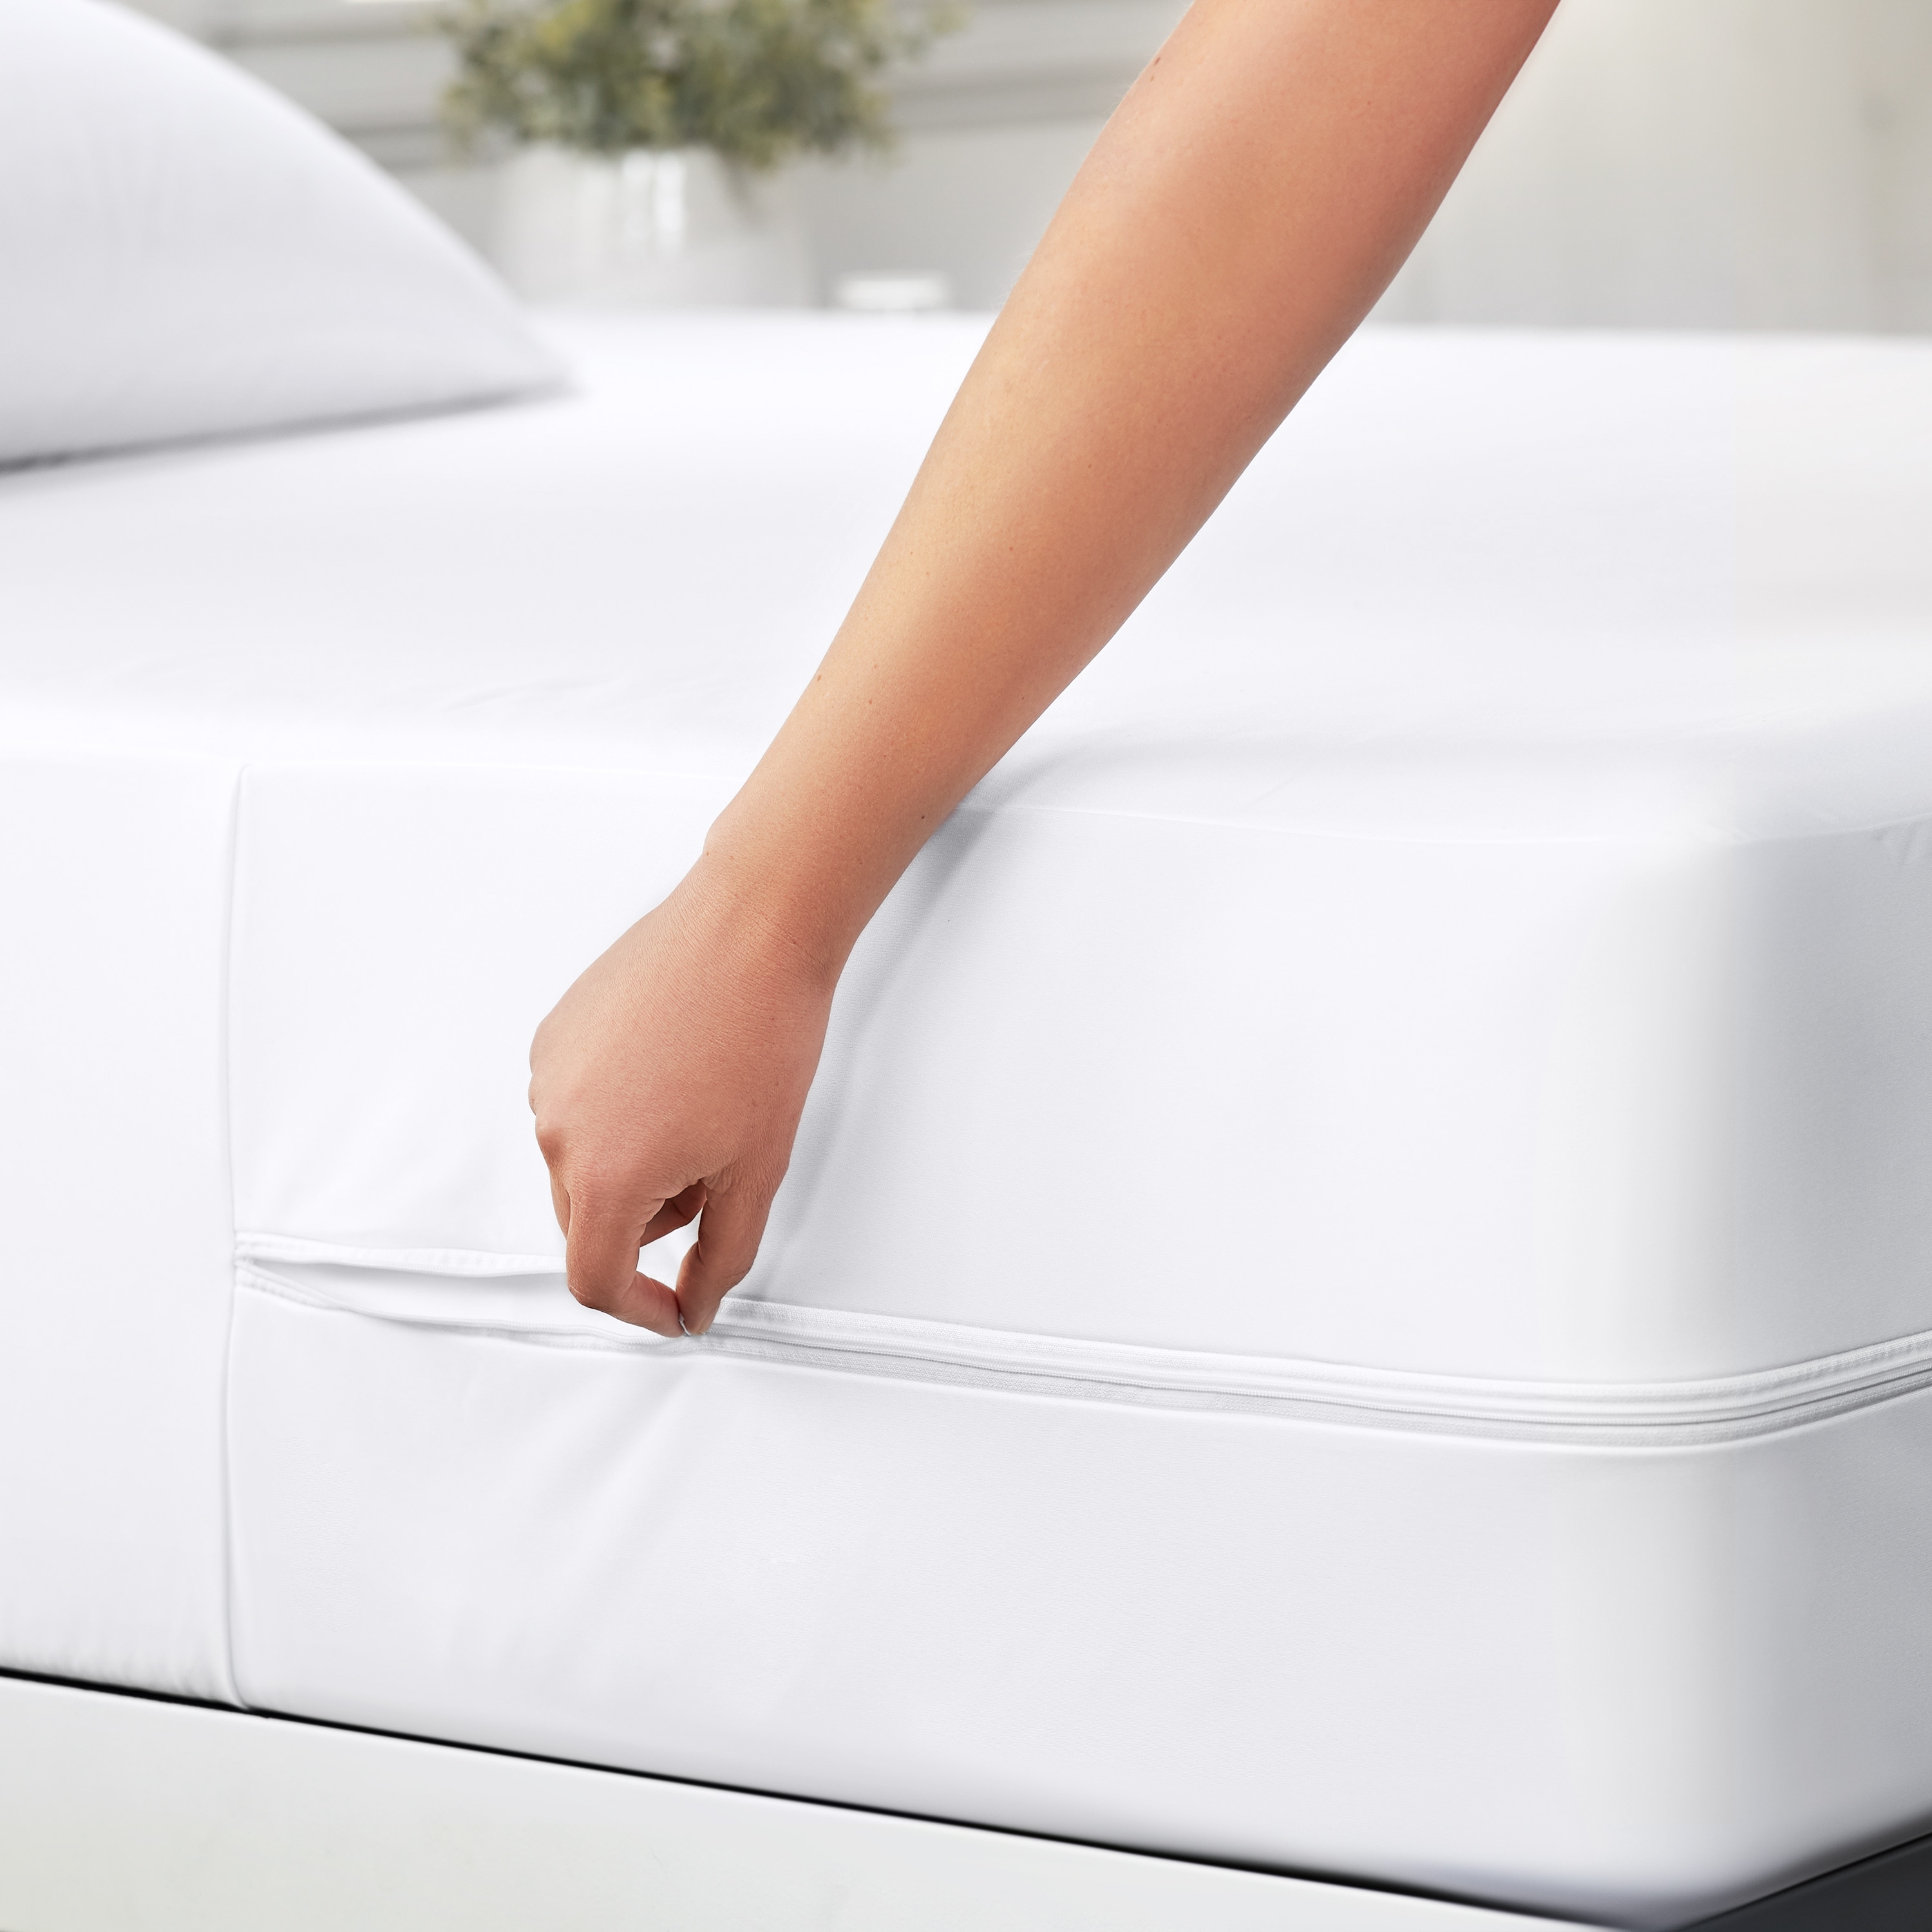 Mattress Protector Pad Topper, Protective Cover Mattresses